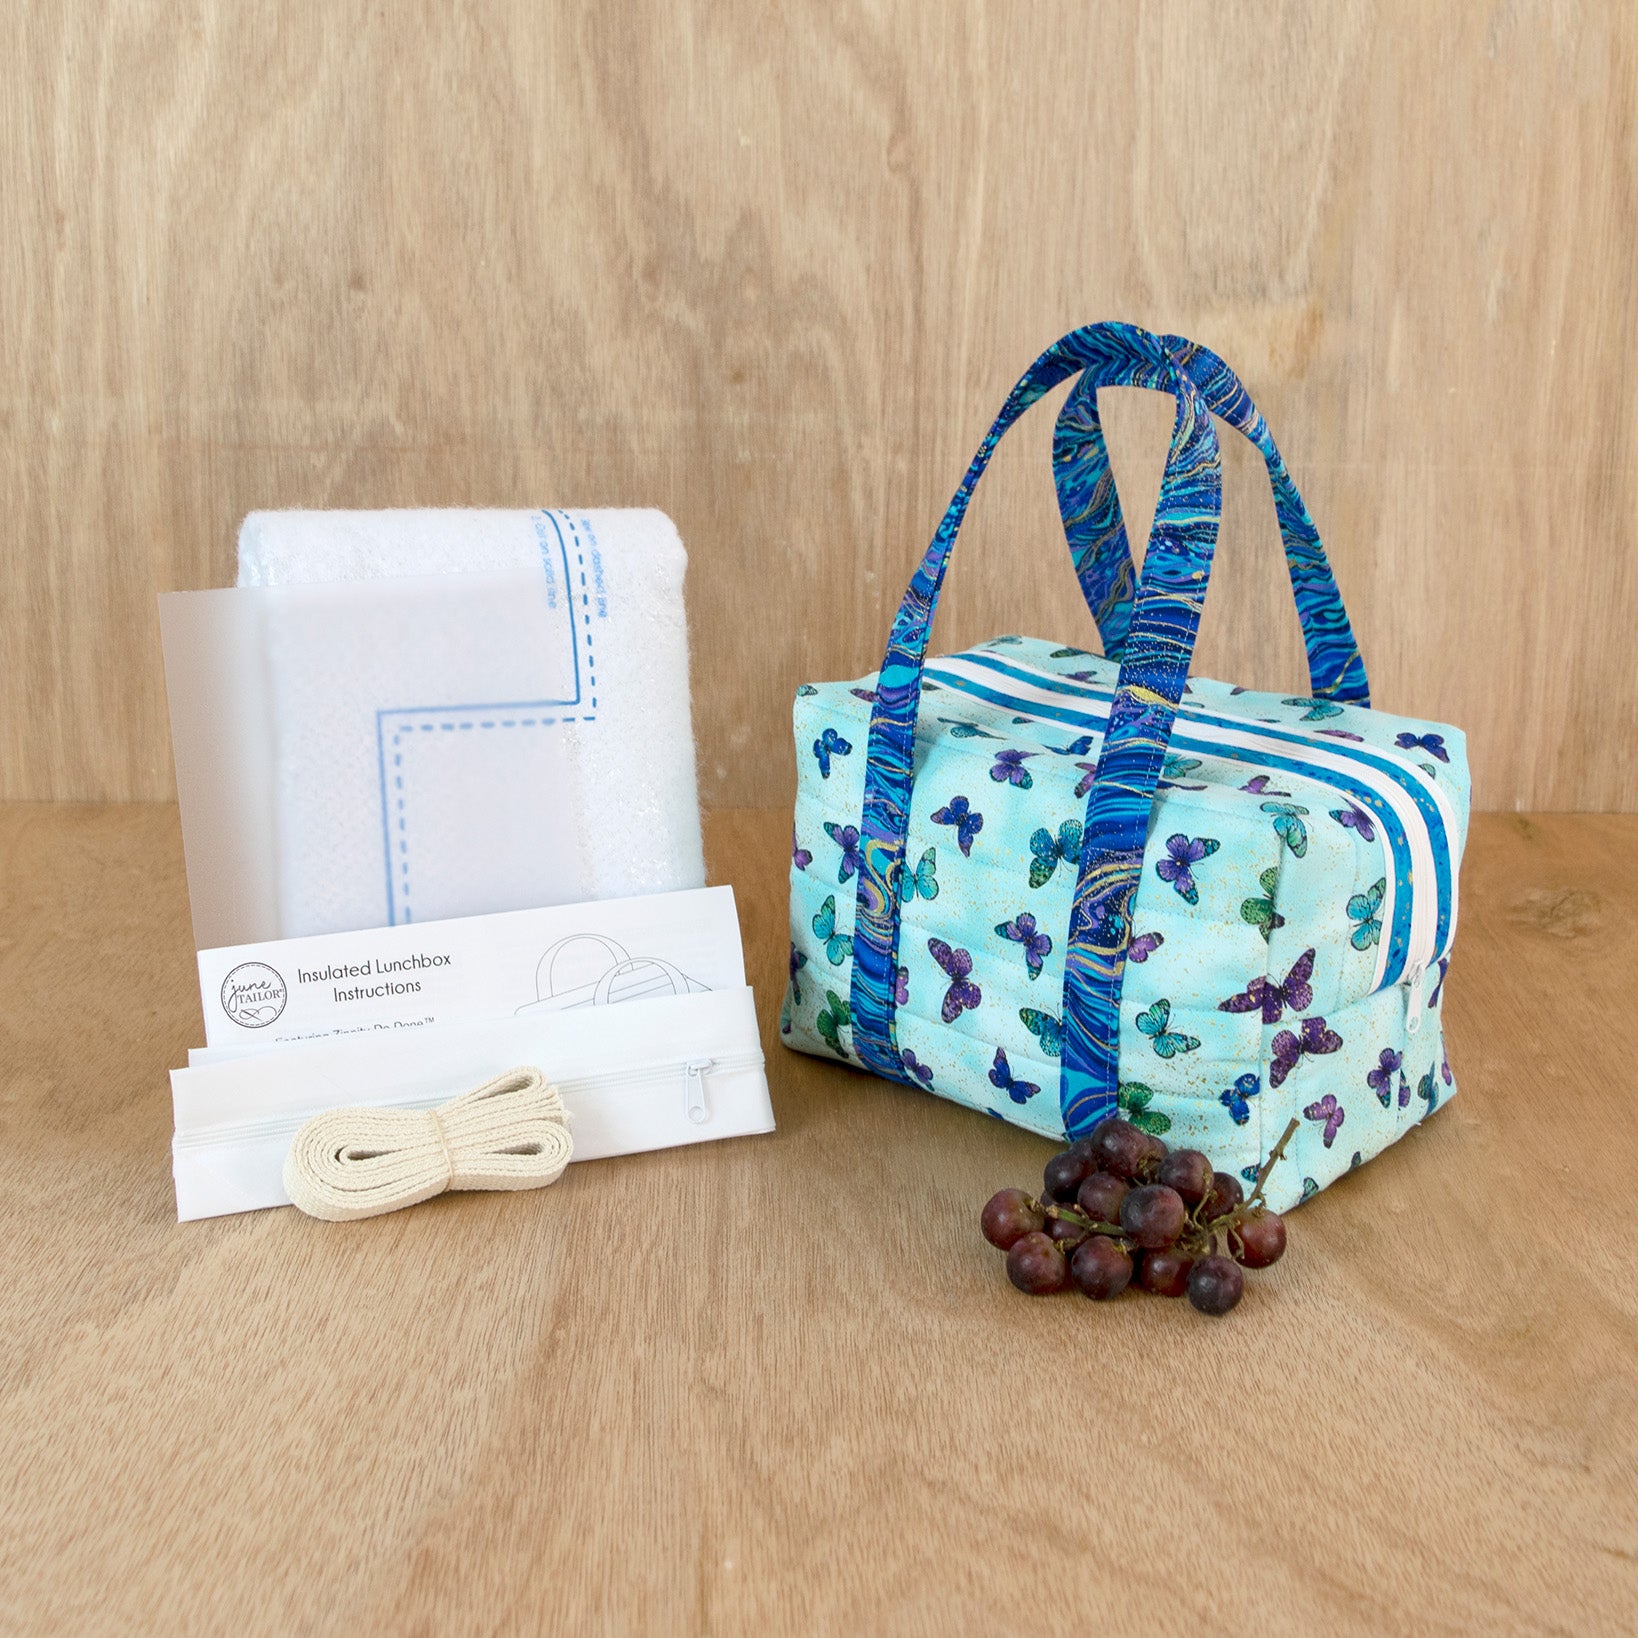 2023 June Tailor Collection-Insulated Lunchbox Tote - Zippity-Do-Done™ White-Kits with Zippity-Do-Done™